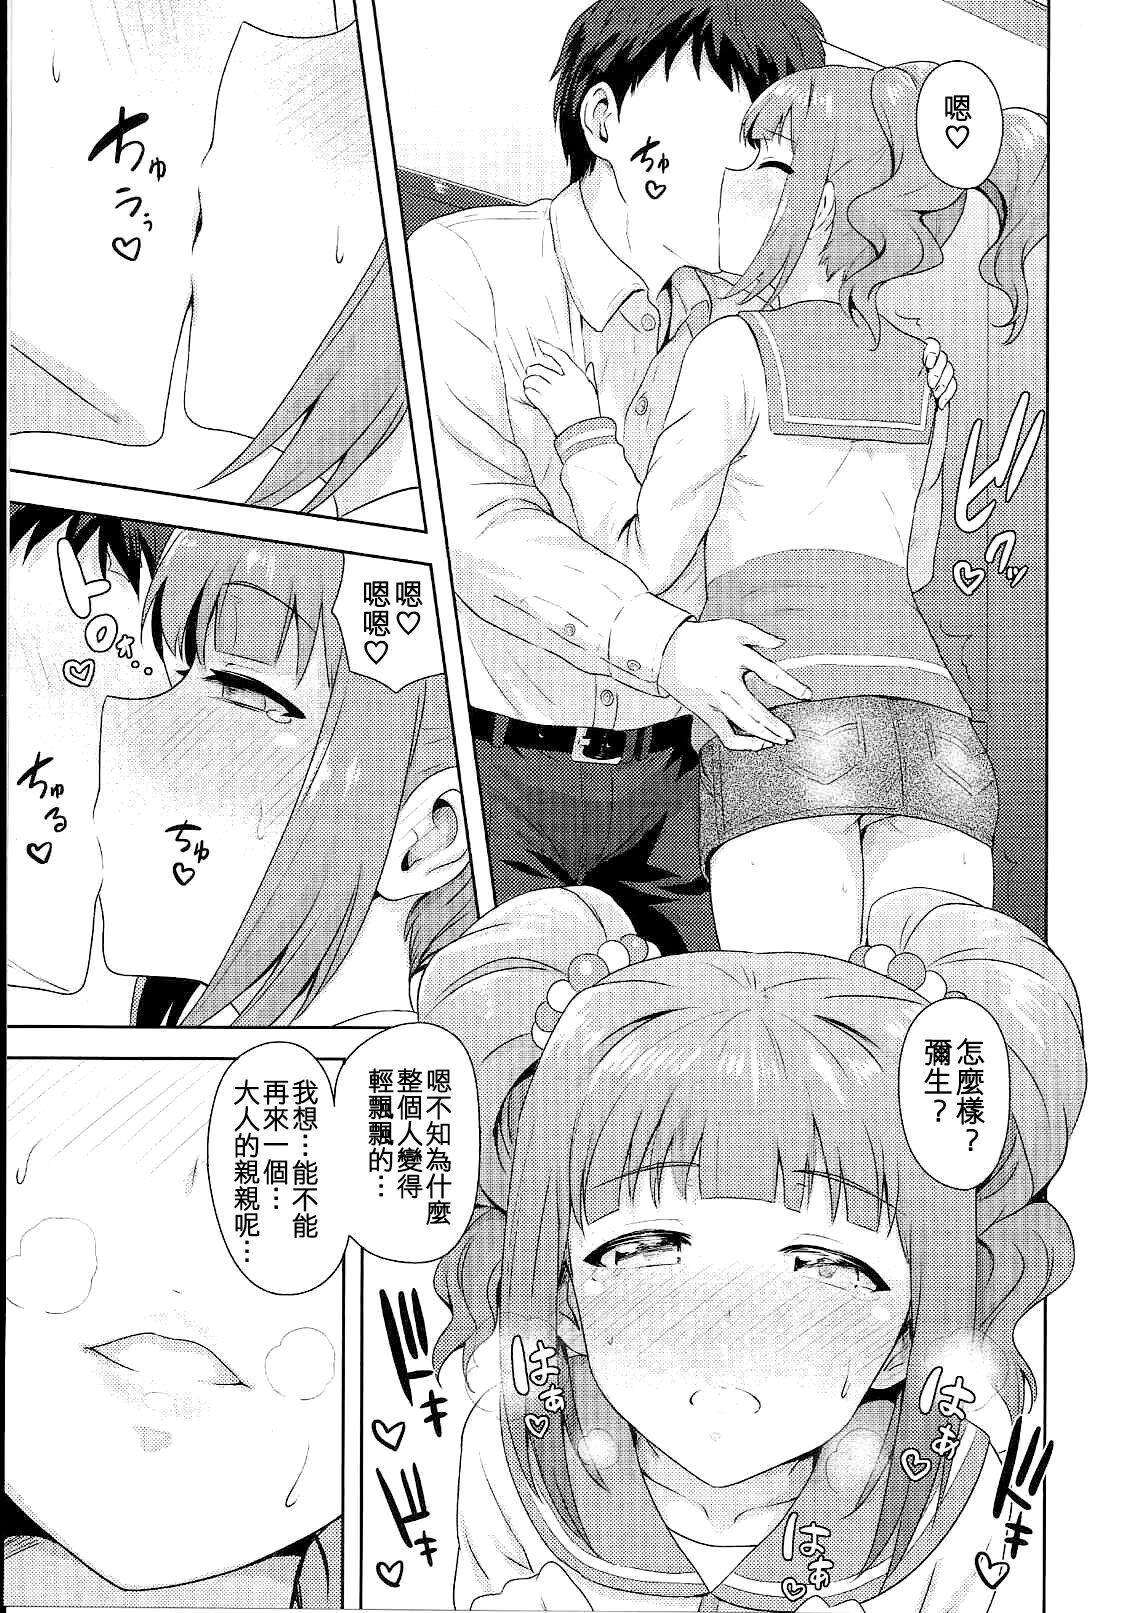 Mallu Yayoi to Issho 2 - The idolmaster Wet Cunt - Page 7